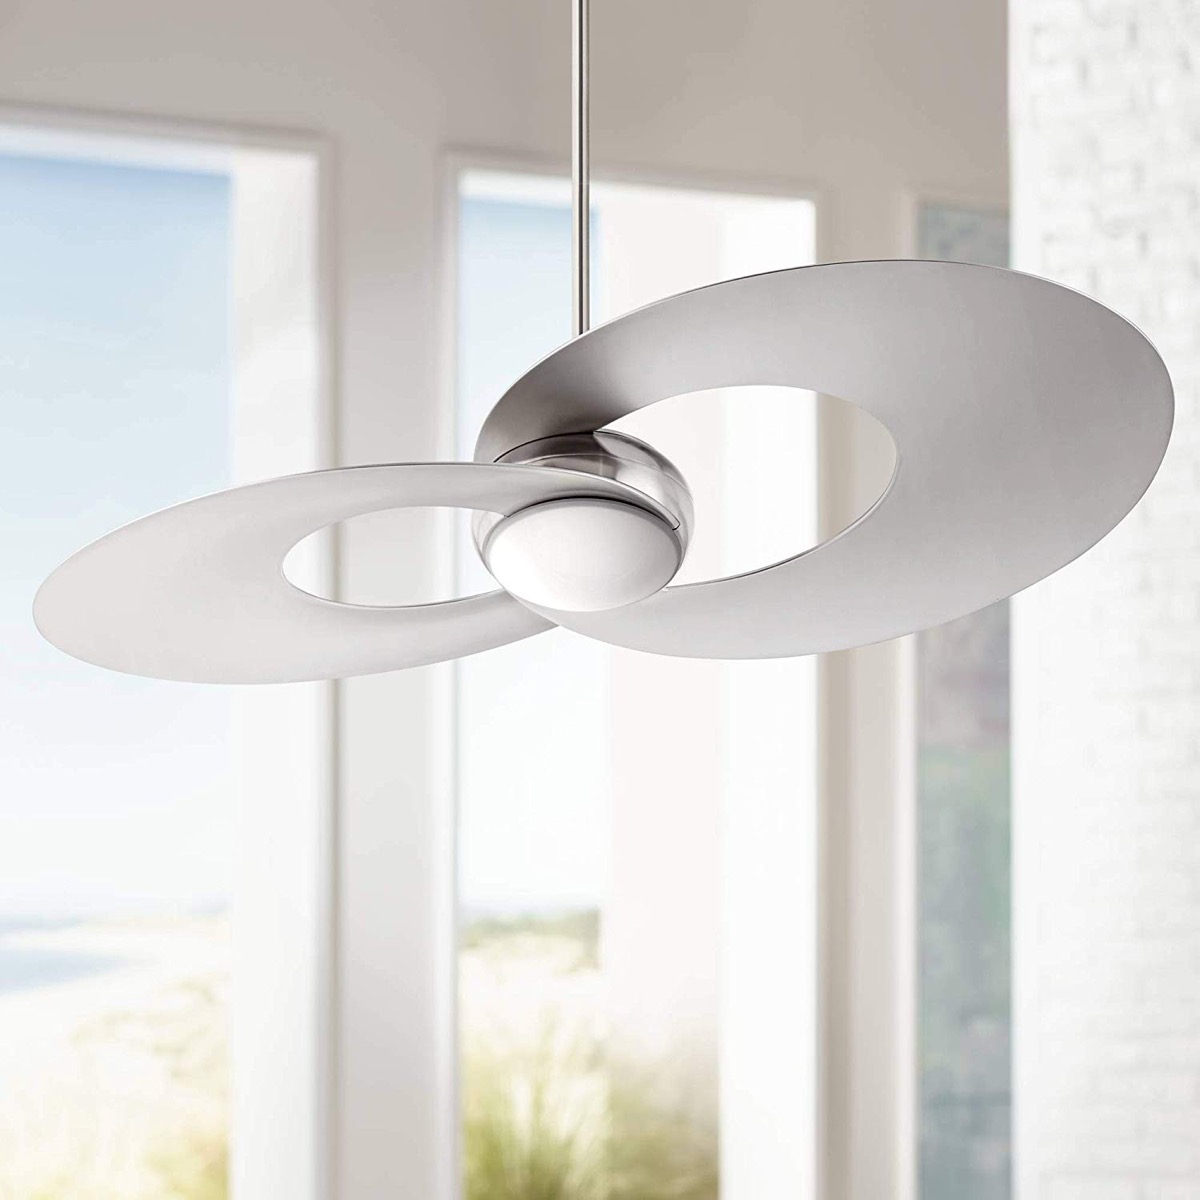 51 Ceiling Fans With Lights That Will, What Ceiling Fan Gives Off The Most Light